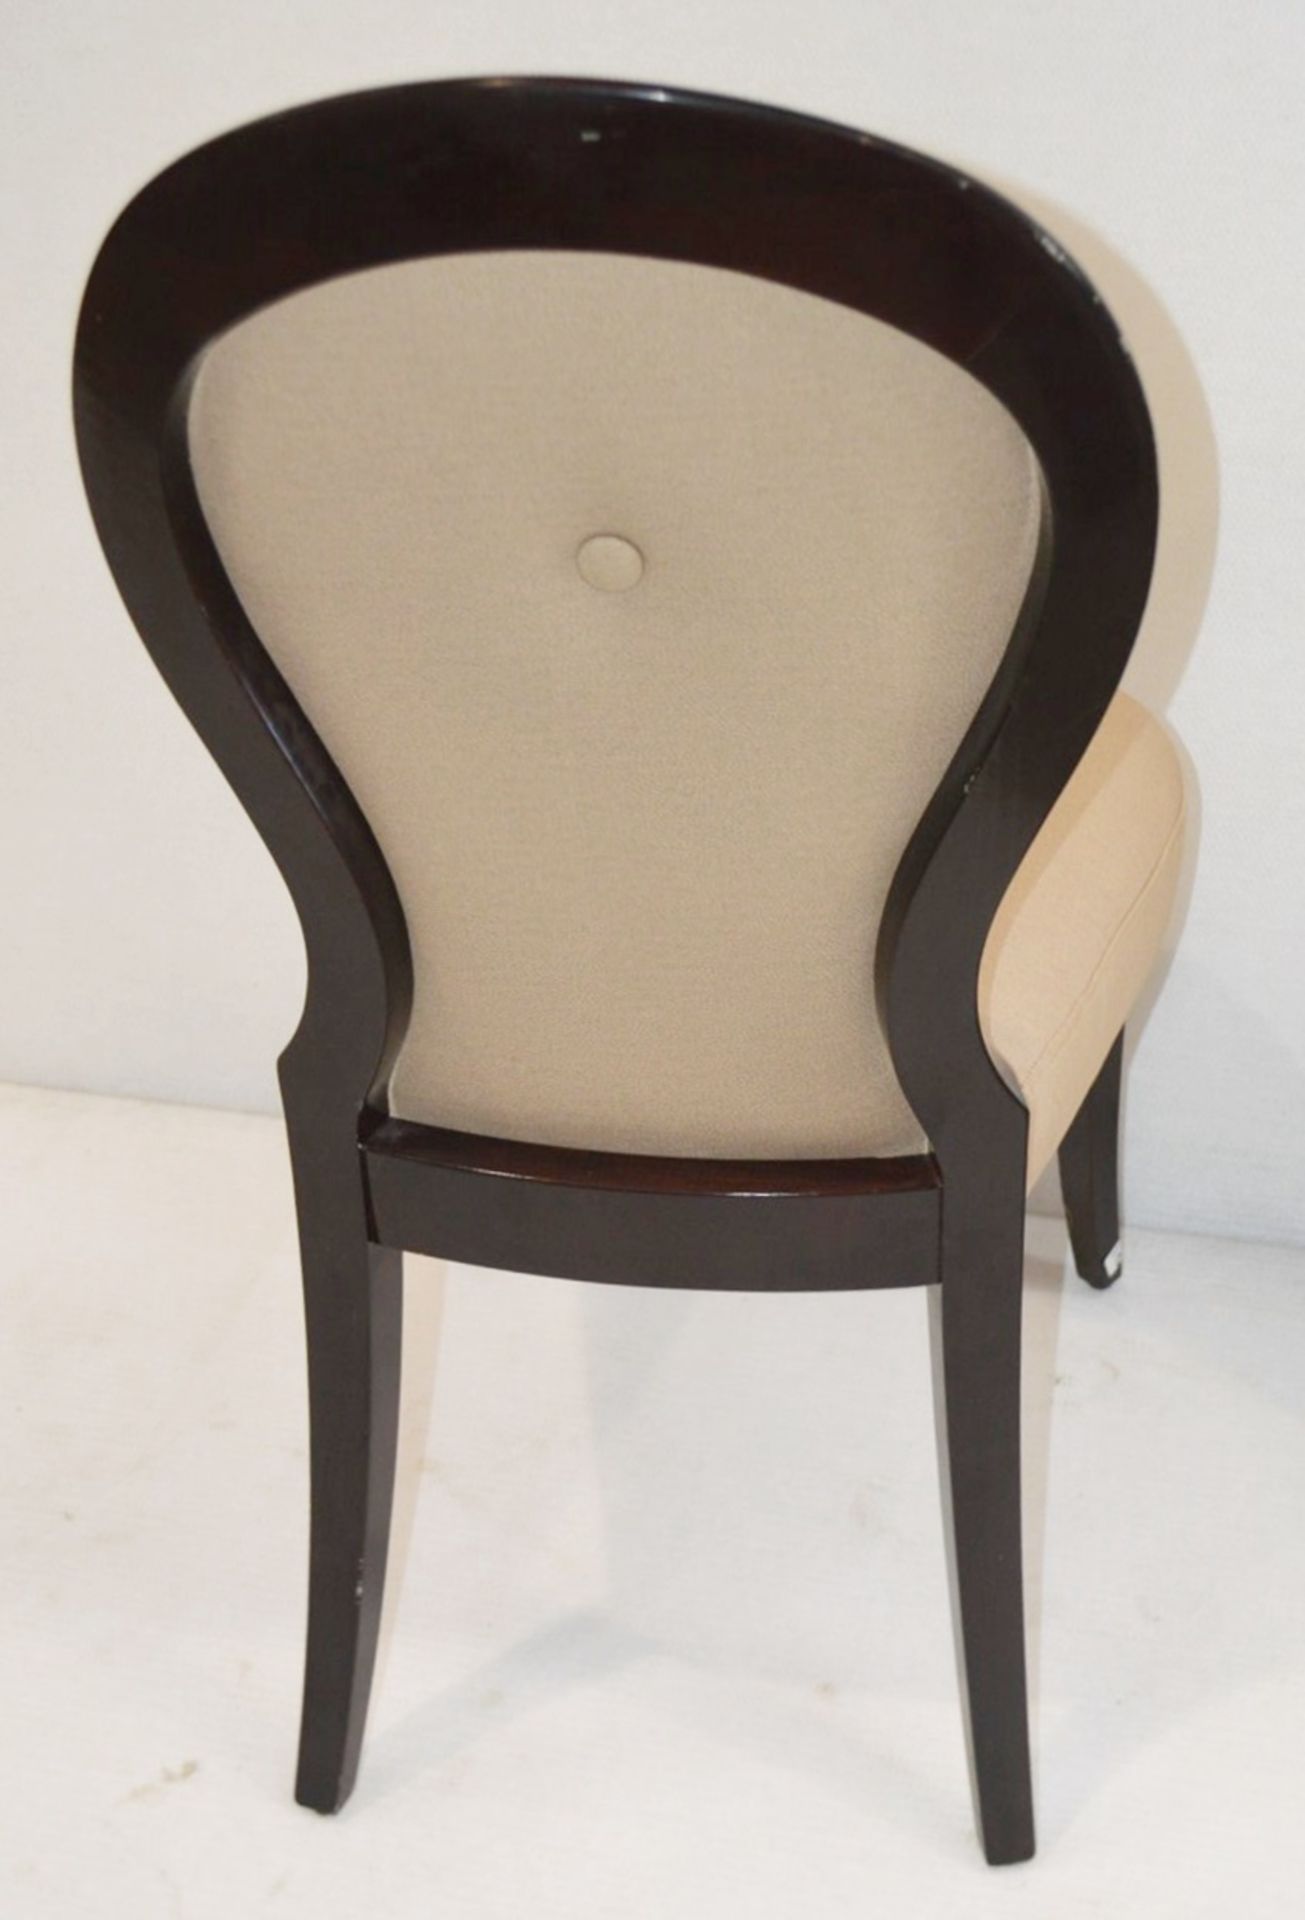 1 x Cushion Backed Chair With Curved Legs - Dimensions: H100 x W49 x D50cm / Seat 48cm - Ref: HMS127 - Image 3 of 4